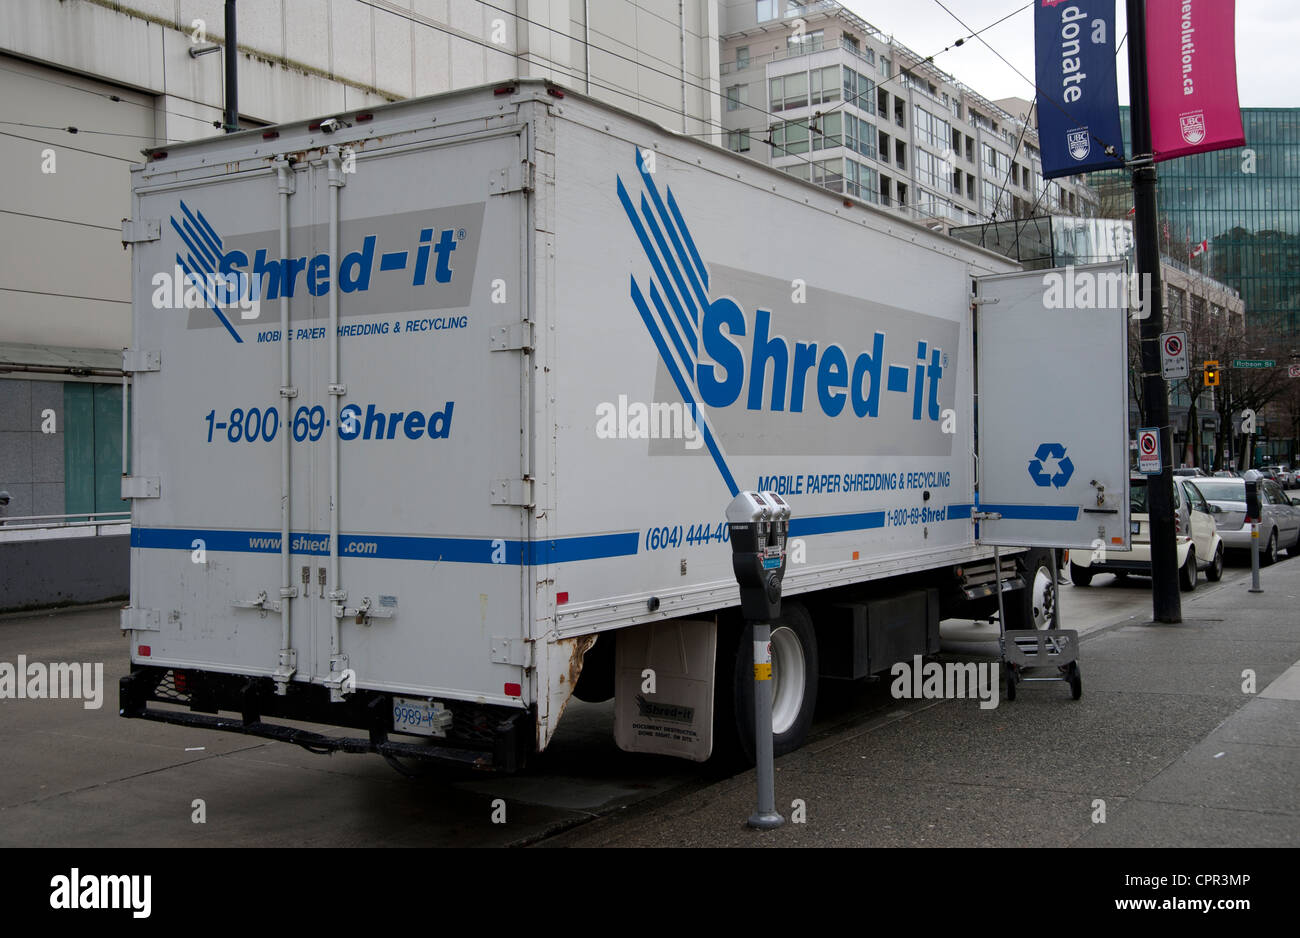 Shred-it truck at the side of the road picking up documents for shredding Stock Photo